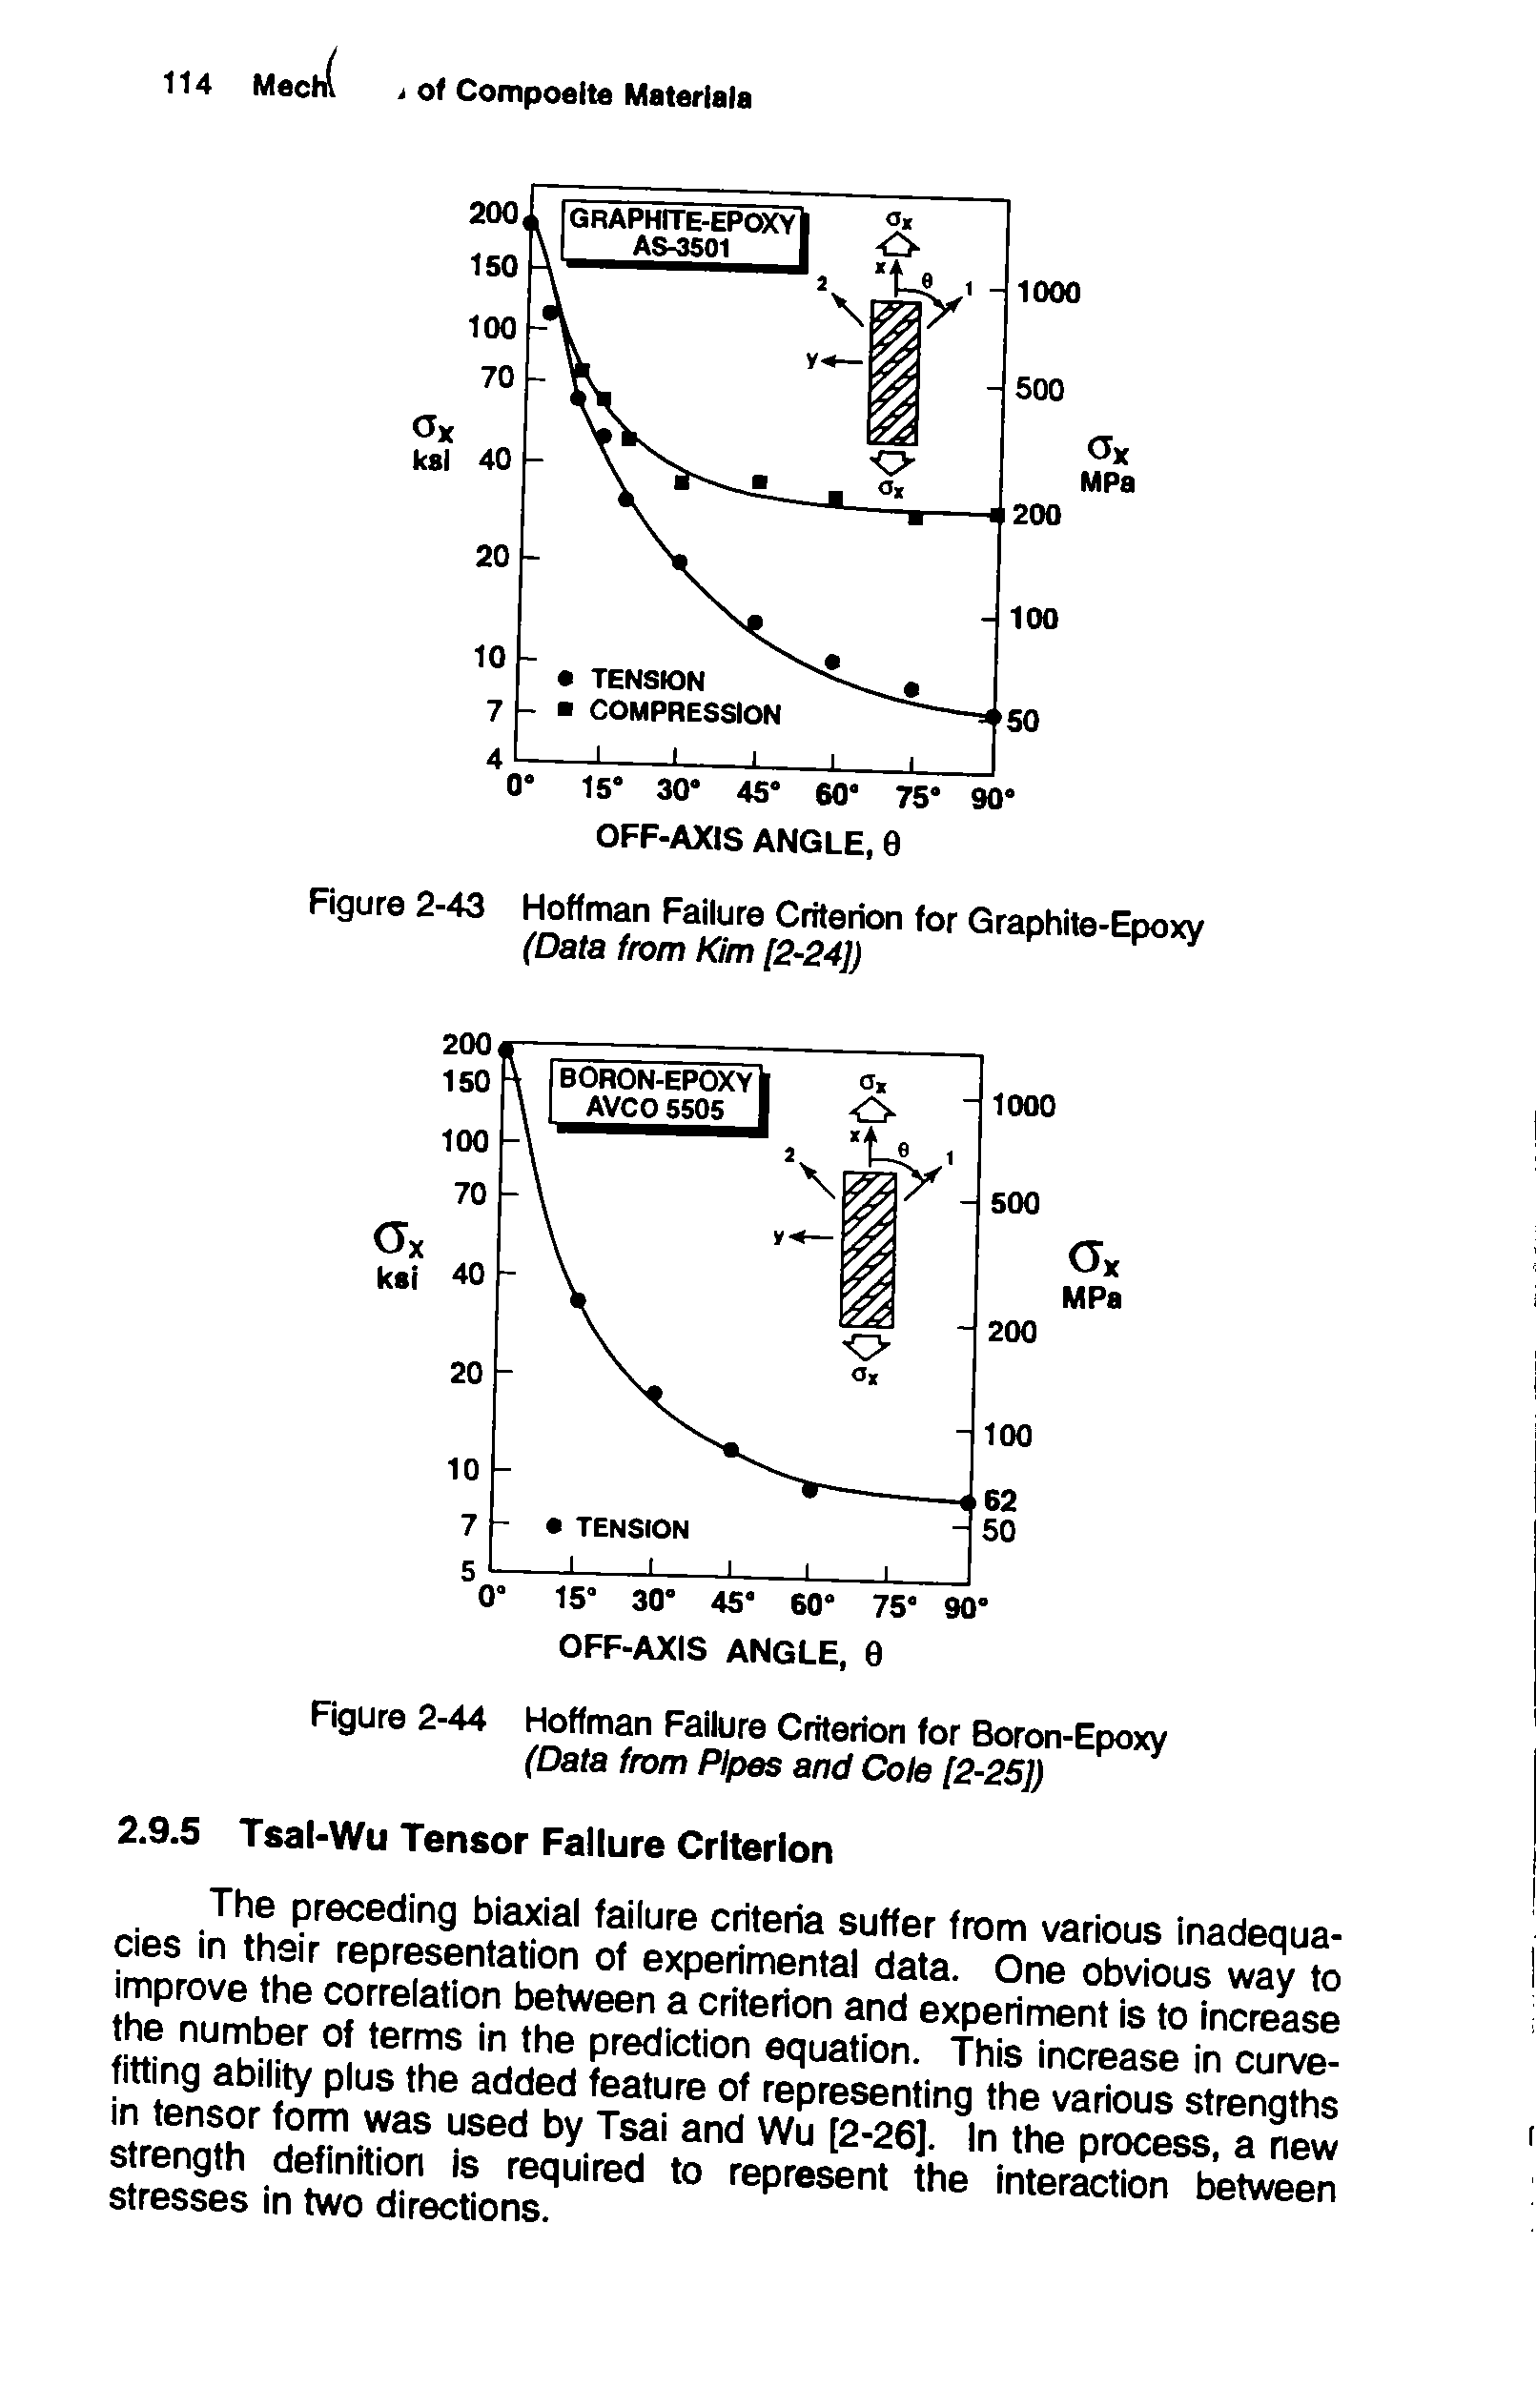 Figure 2-44 Hoffman Failure Criterion for Boron-Epoxy (Data from Pipes and Cole [2-25])...